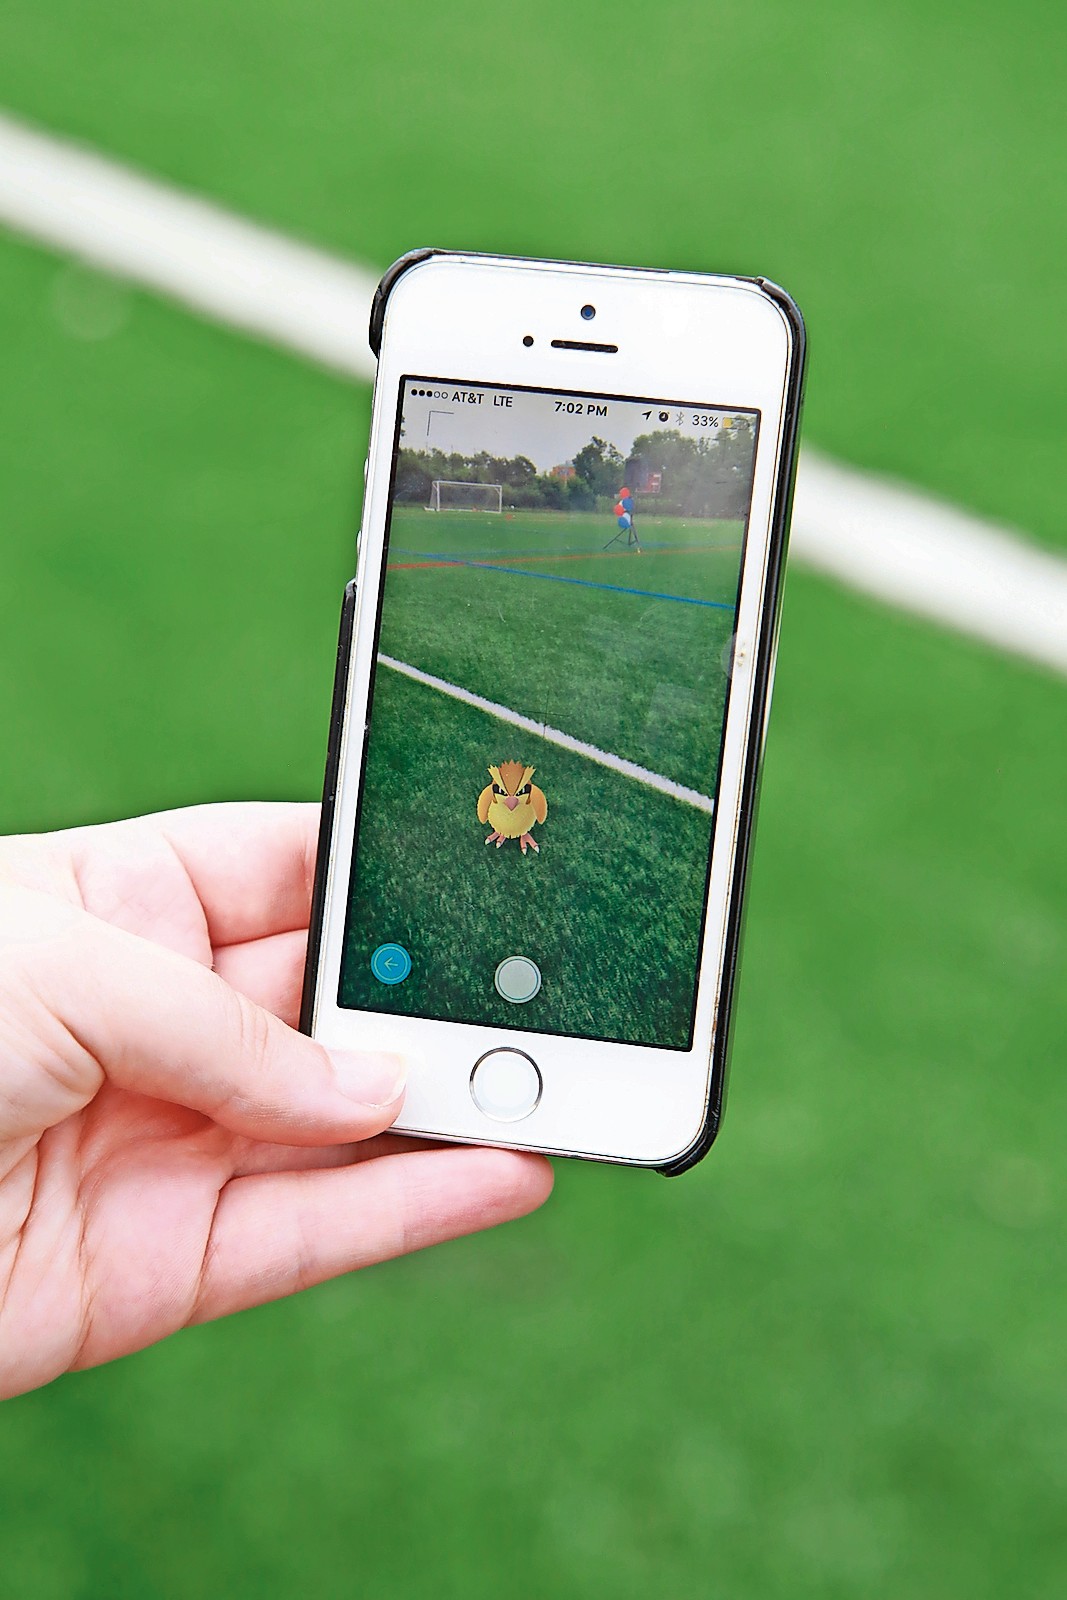 The game Pokemon Go uses augmented reality to display creatures as if they are standing in real world environments.